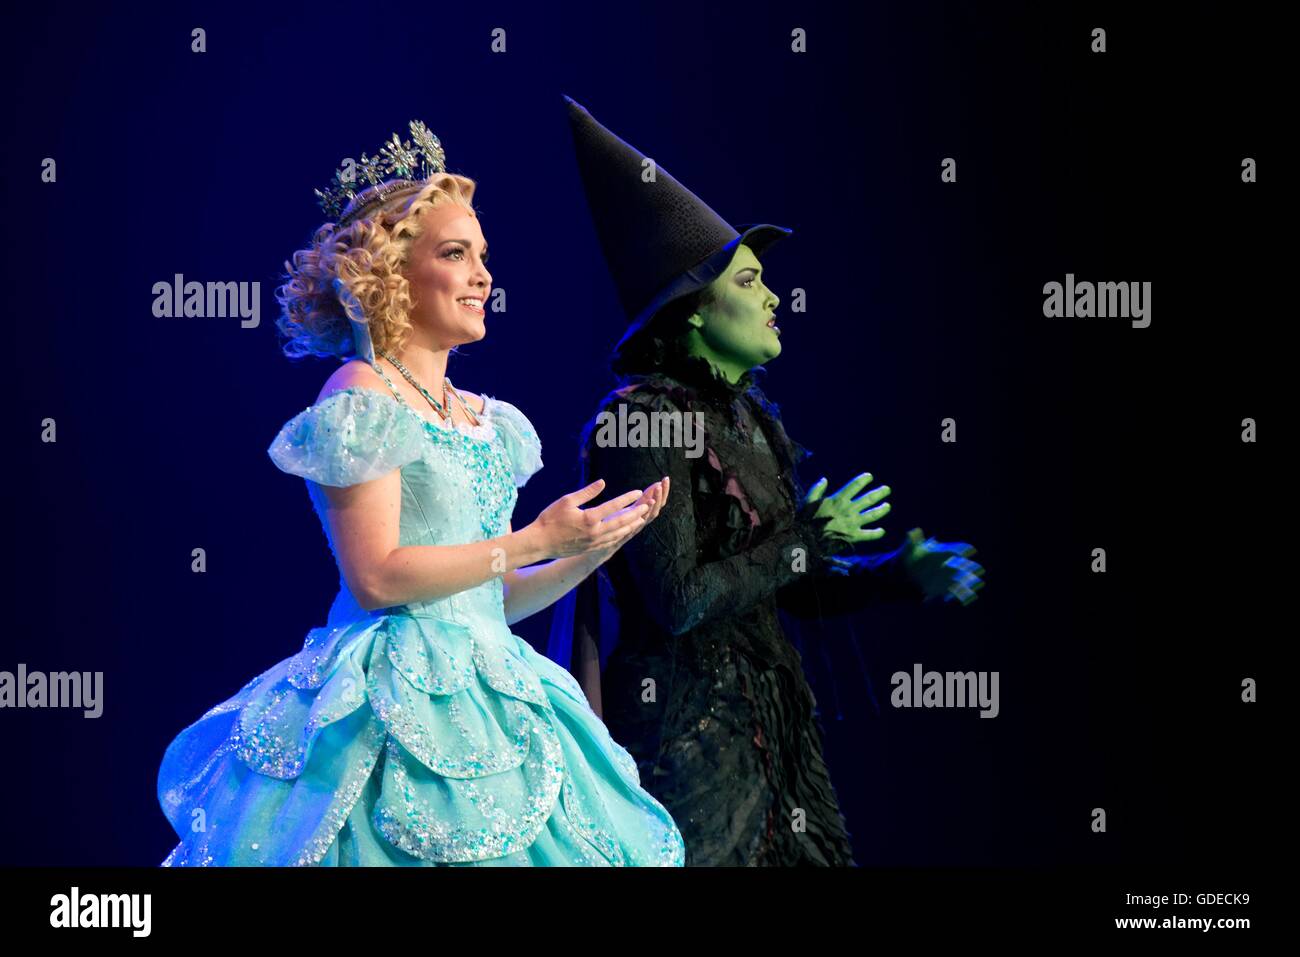 The good witch and wicked witch from the Broadway musical Wicked performs for U.S President Barack Obama and German Chancellor Angela Merkel during the opening ceremony for the USA Pavilion at the Hannover Messe Trade Fair April 25, 2016 in Hannover, Germany. The event is the world's largest industrial technology trade fair held yearly since 1947 in northern Germany. Stock Photo